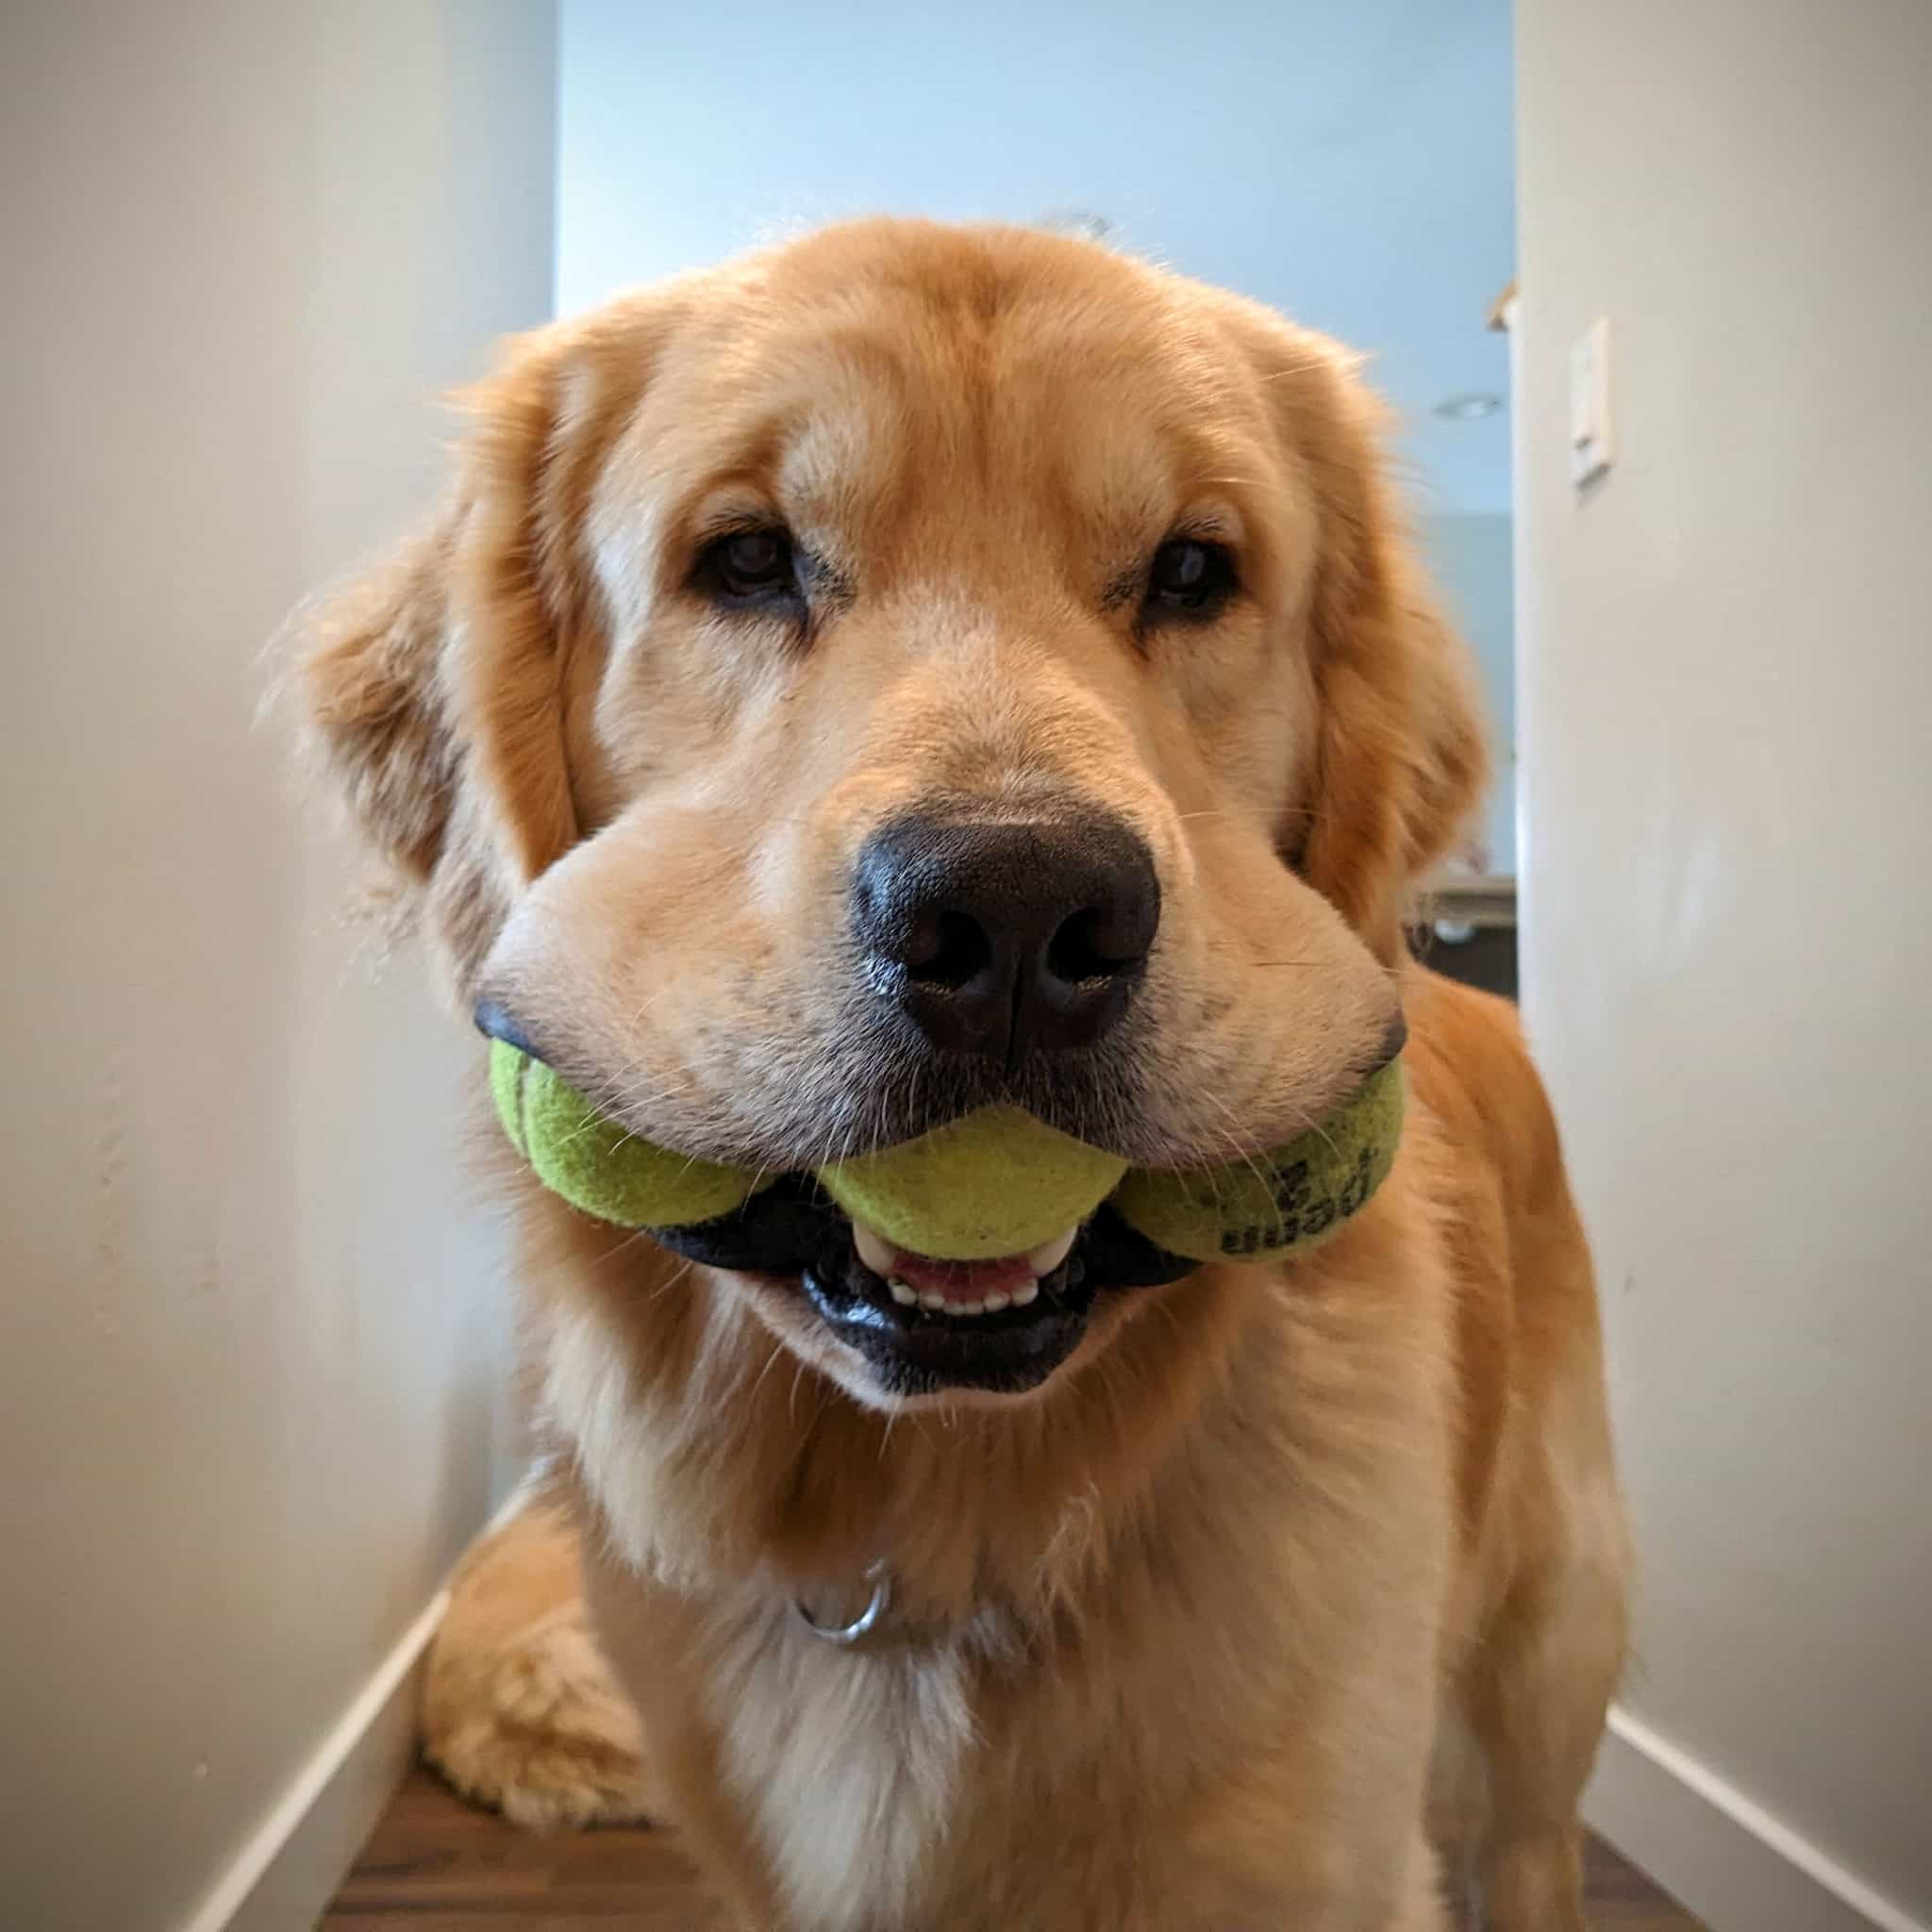 Golden retriever looking goofy with 3 tennis balls in his mouth.